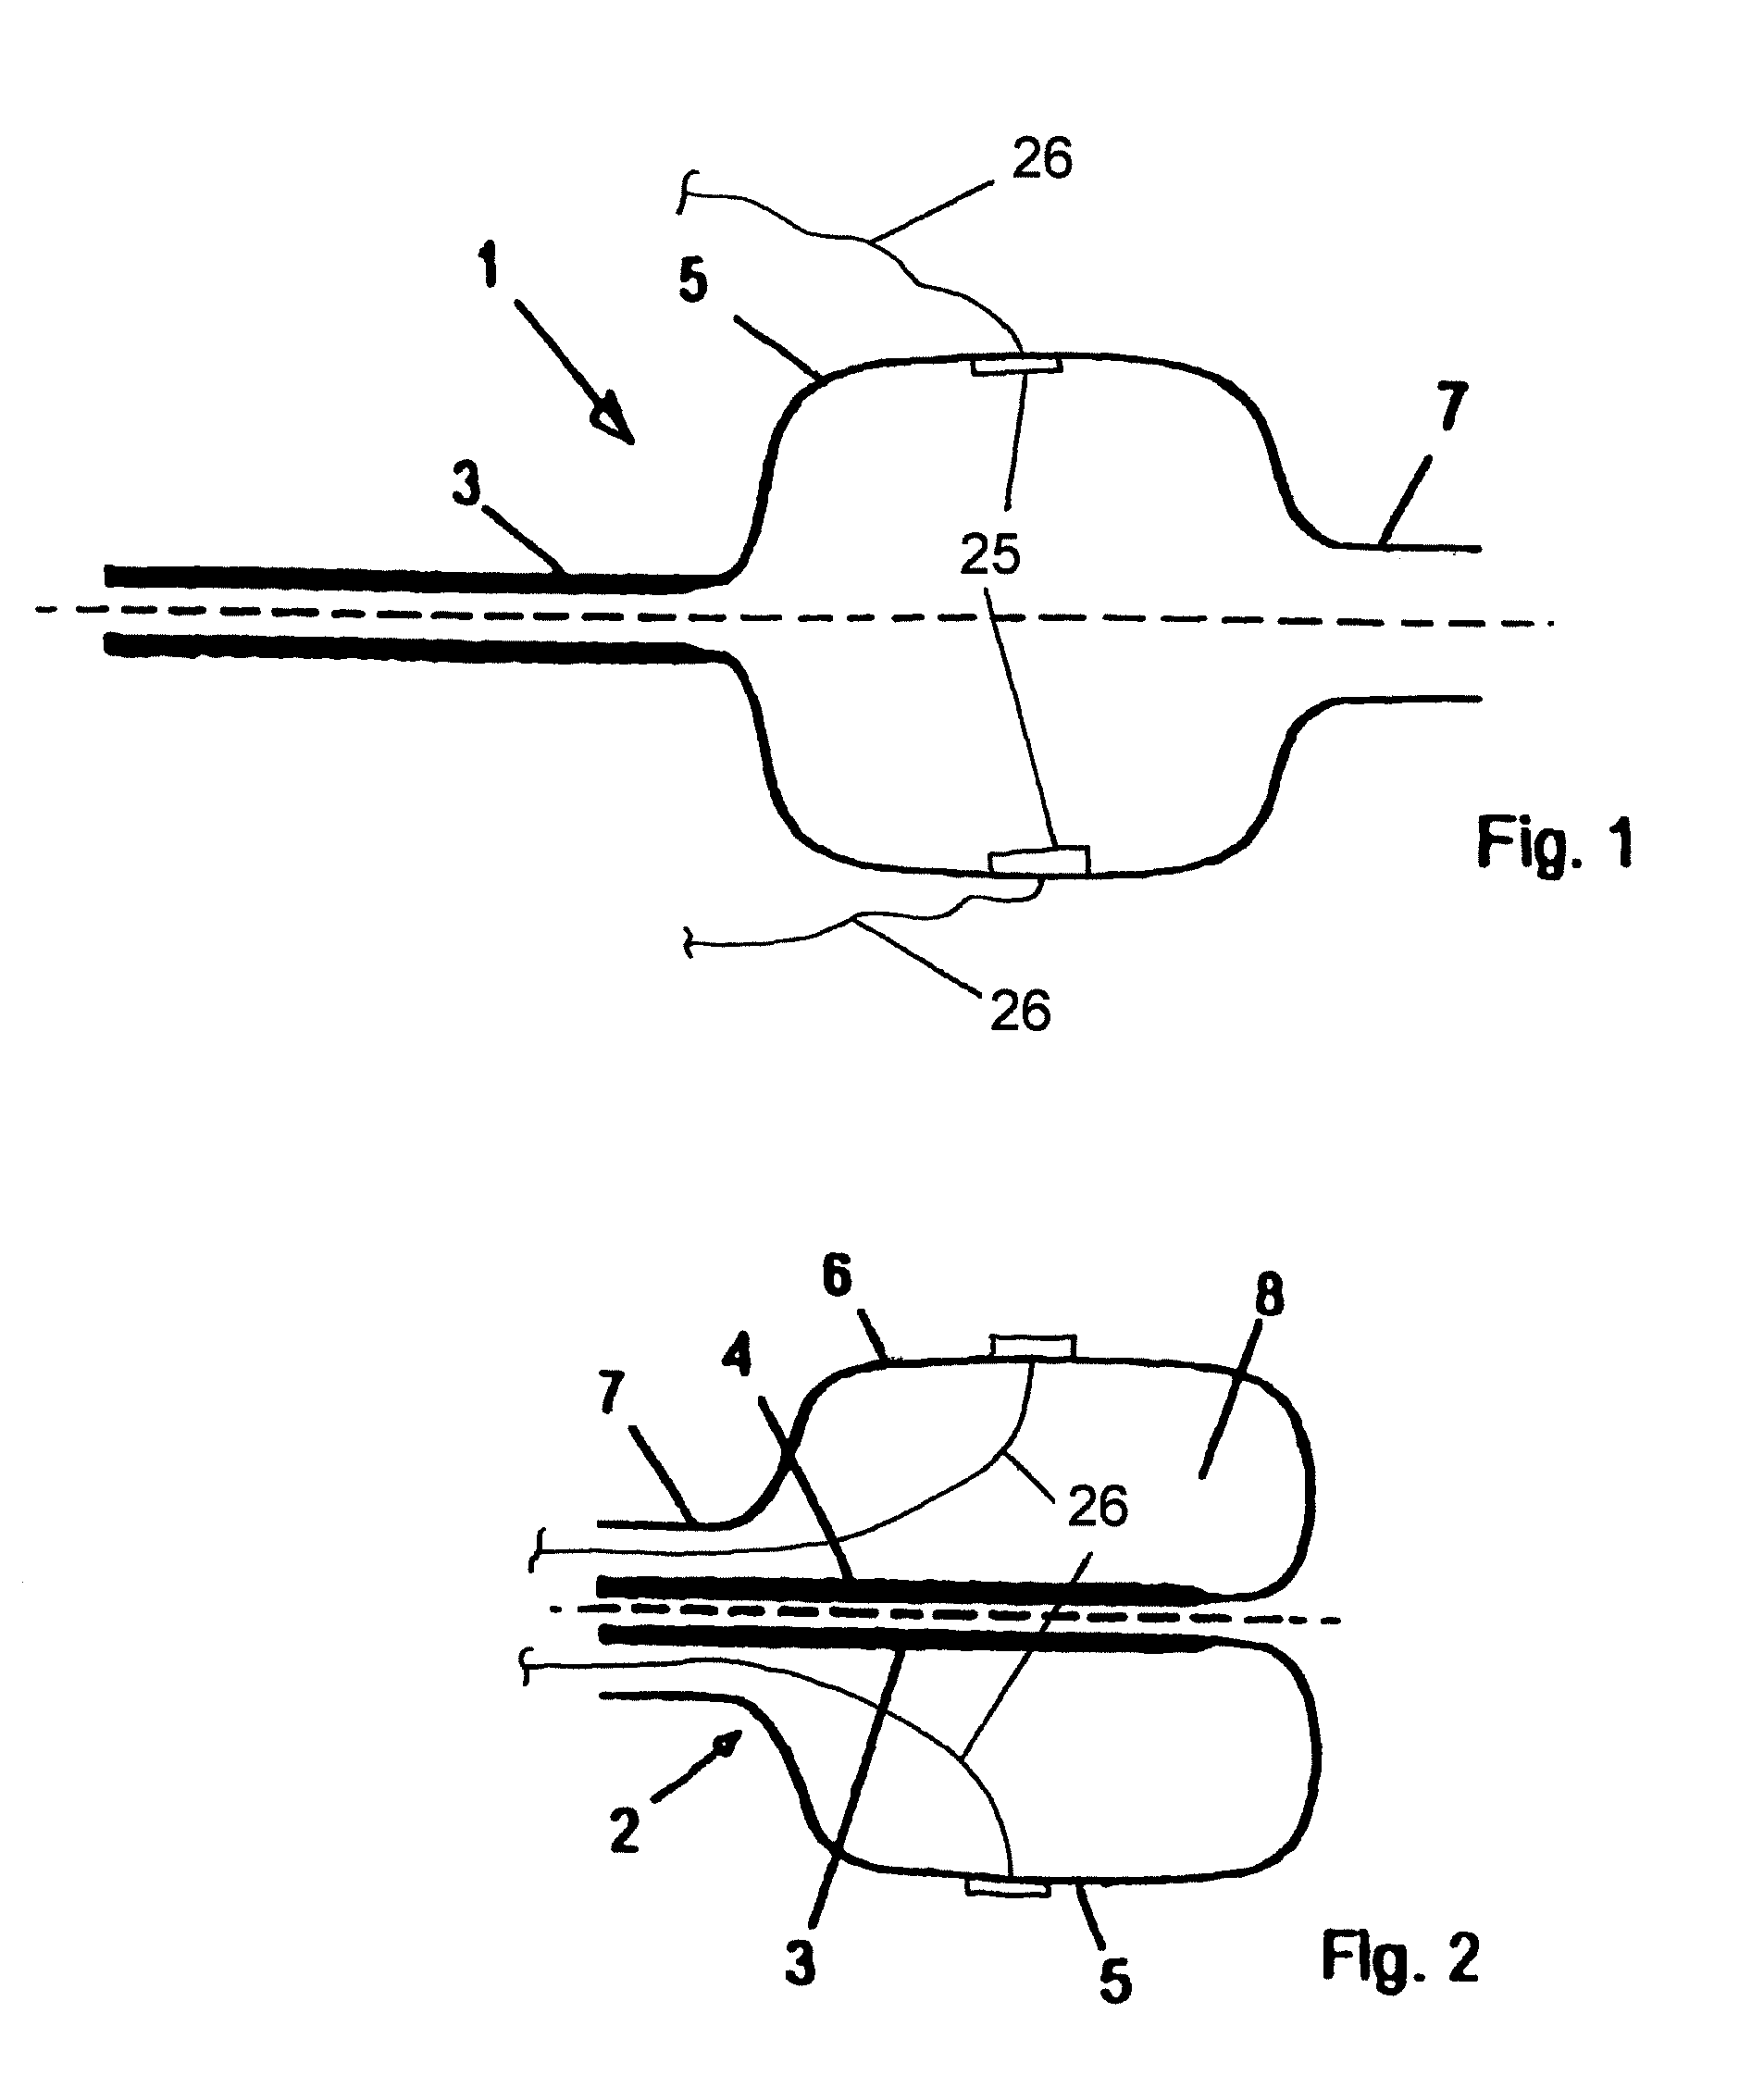 Device for tamponade of body cavities and mechanical anchoring of a catheter